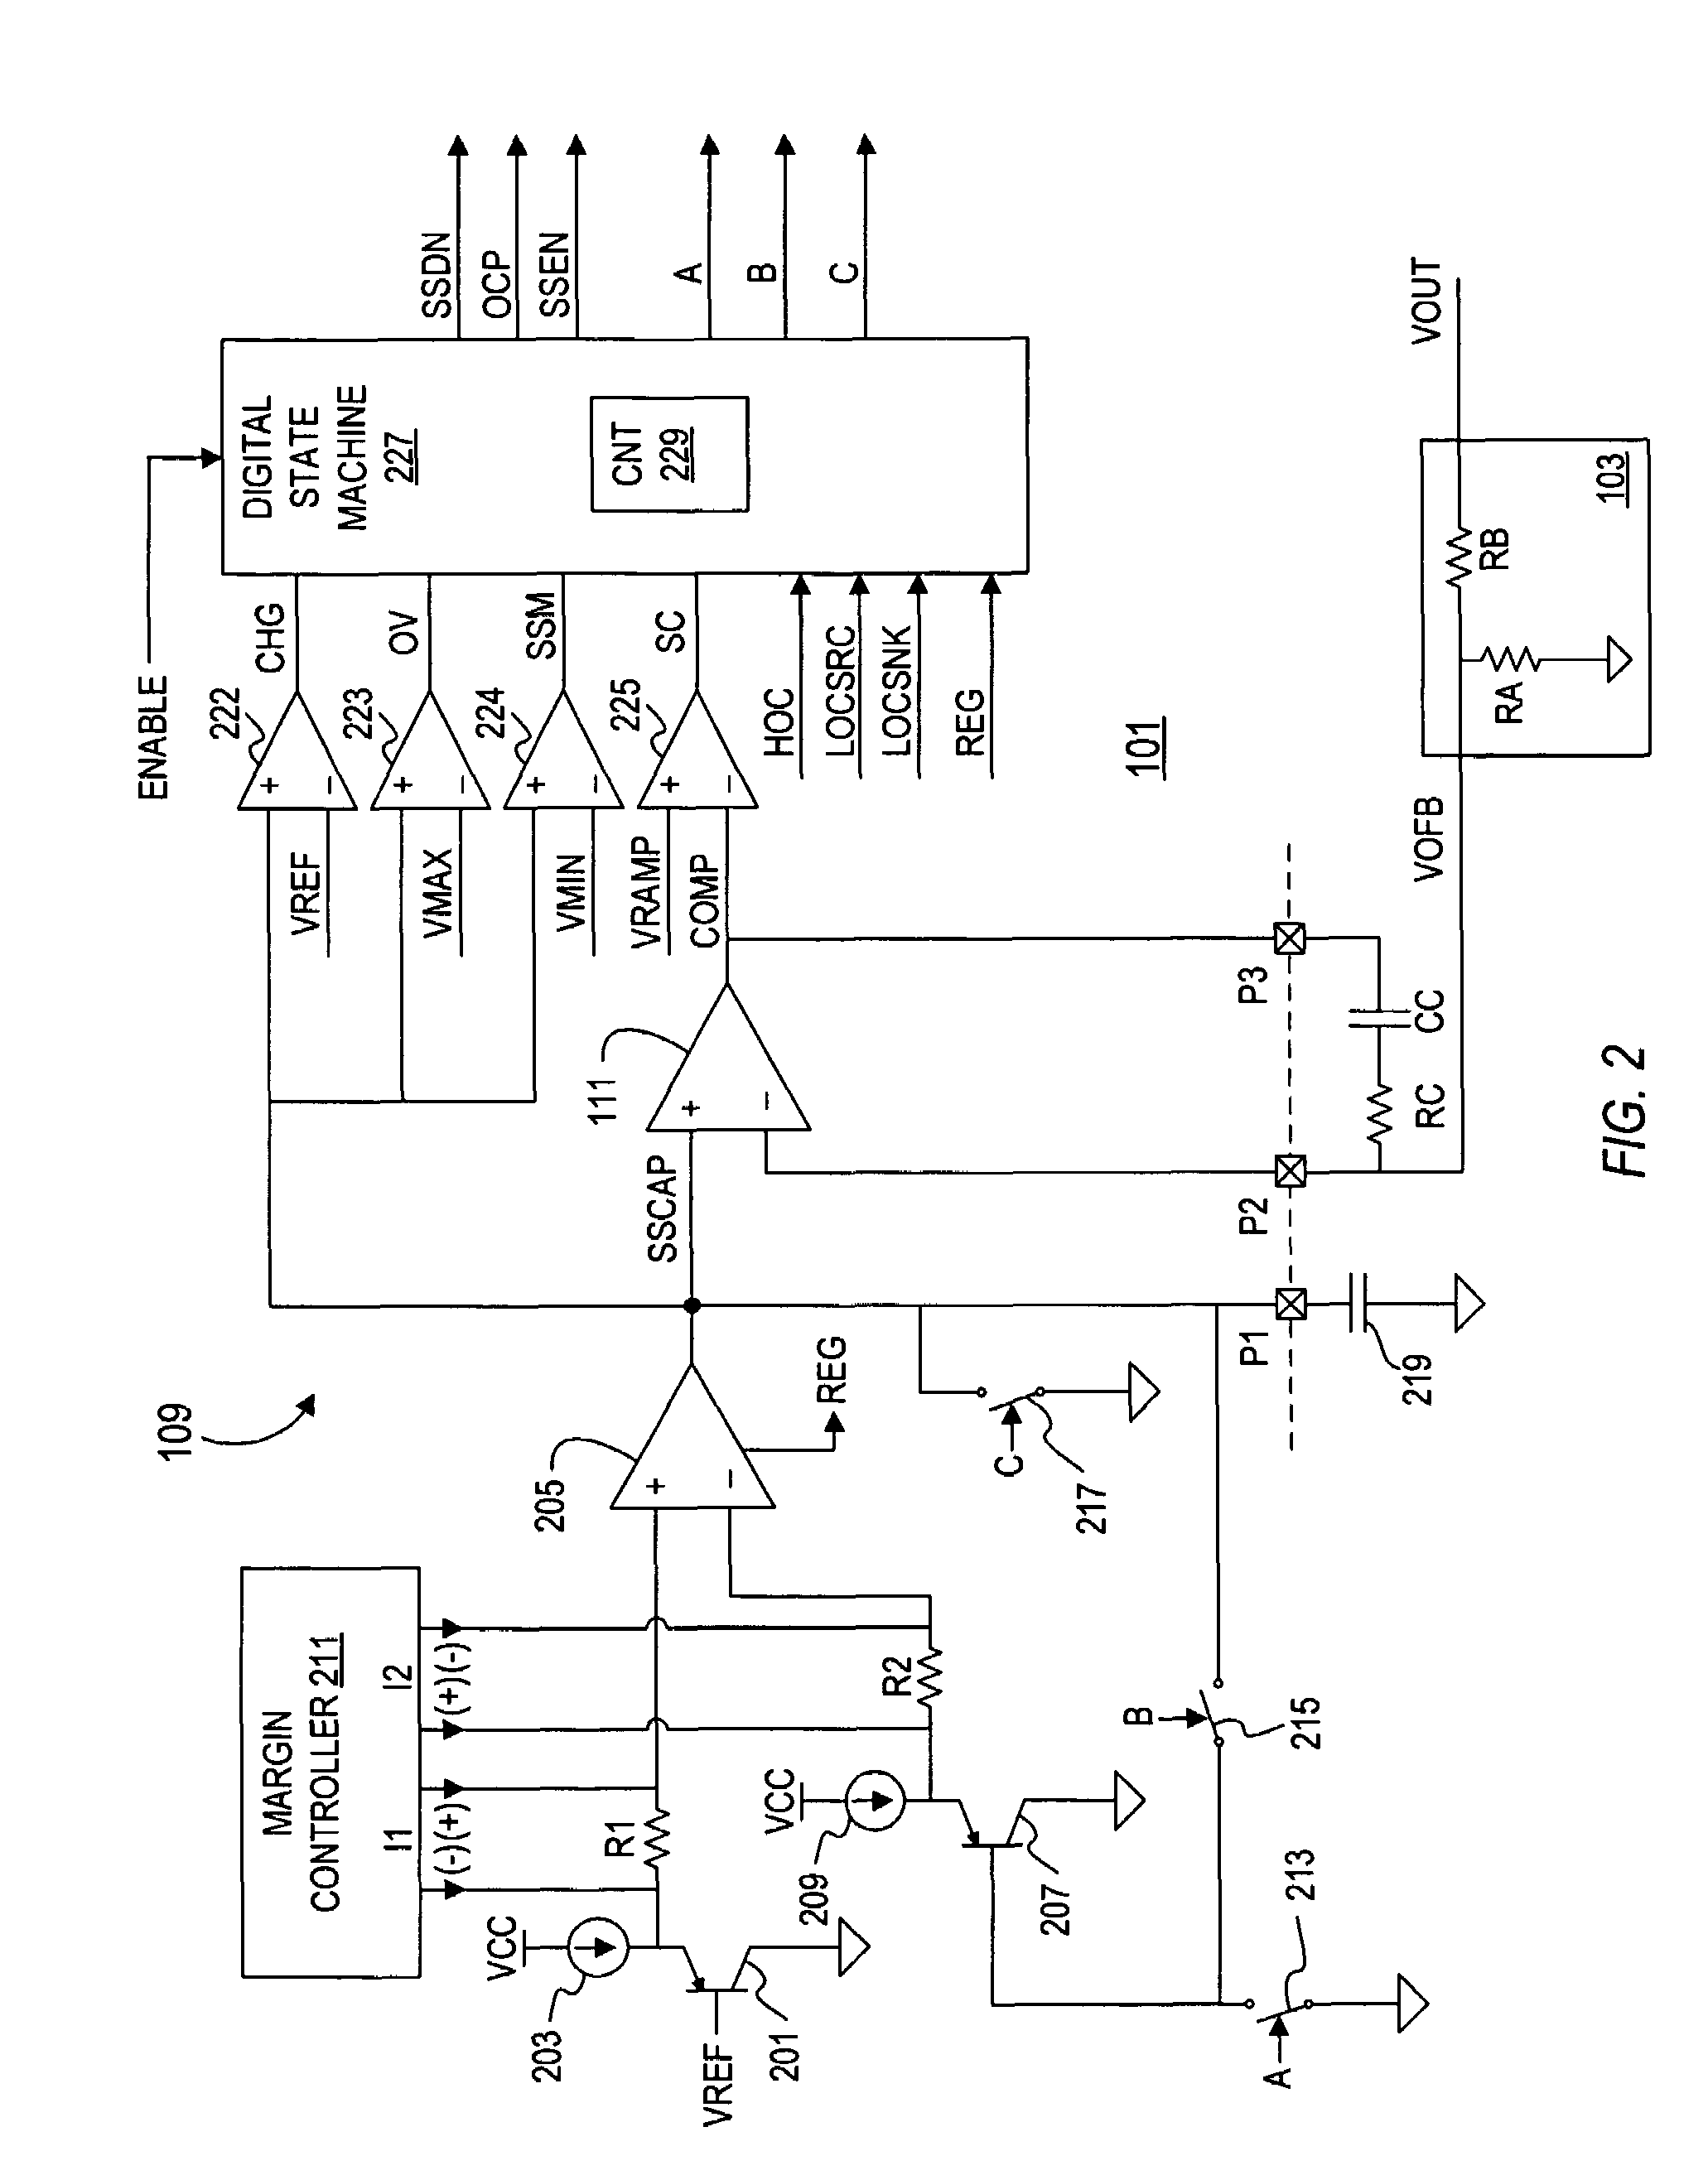 Startup circuit for a DC-DC converter